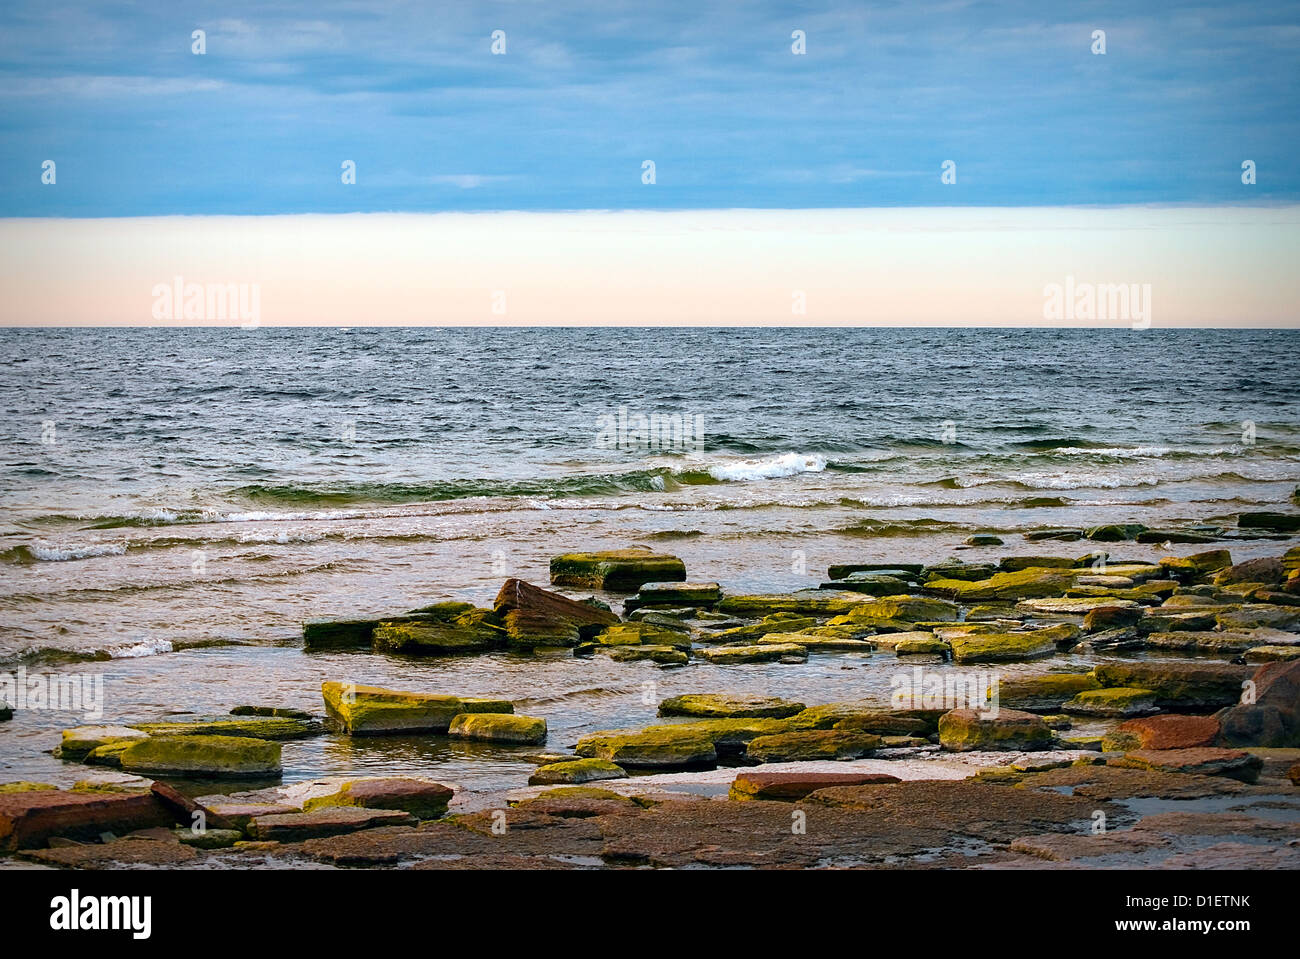 Colorful stones at beach and a wonderful sky with dark blue clouds Stock Photo